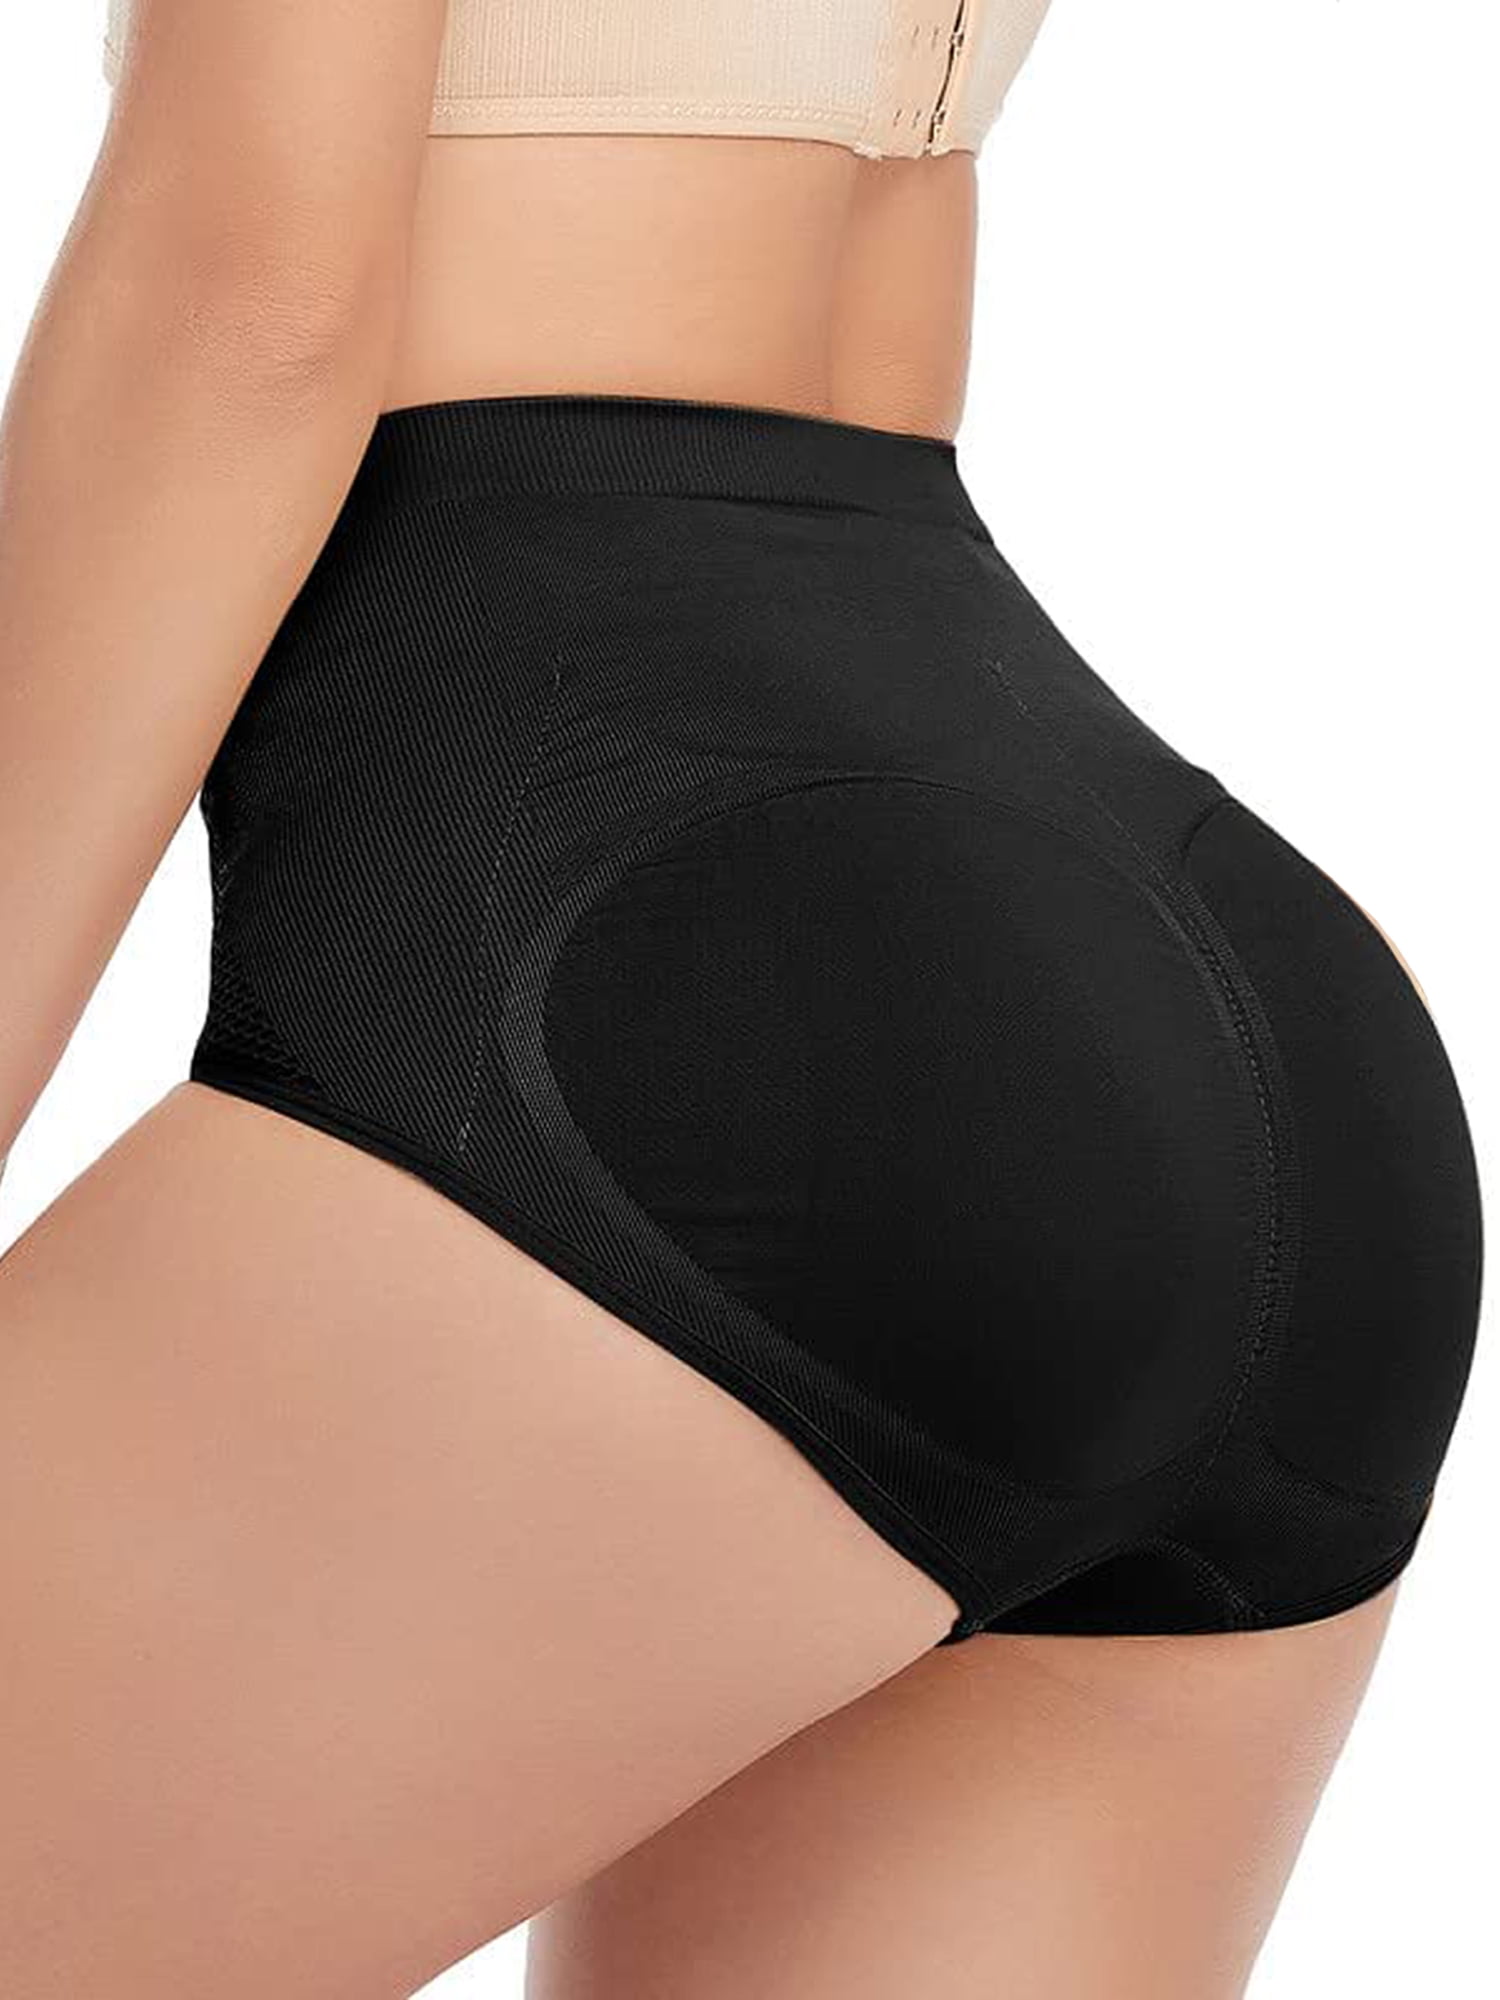 Buy MISS MOLY Tummy Control Pants High Waist Shaping Knickers